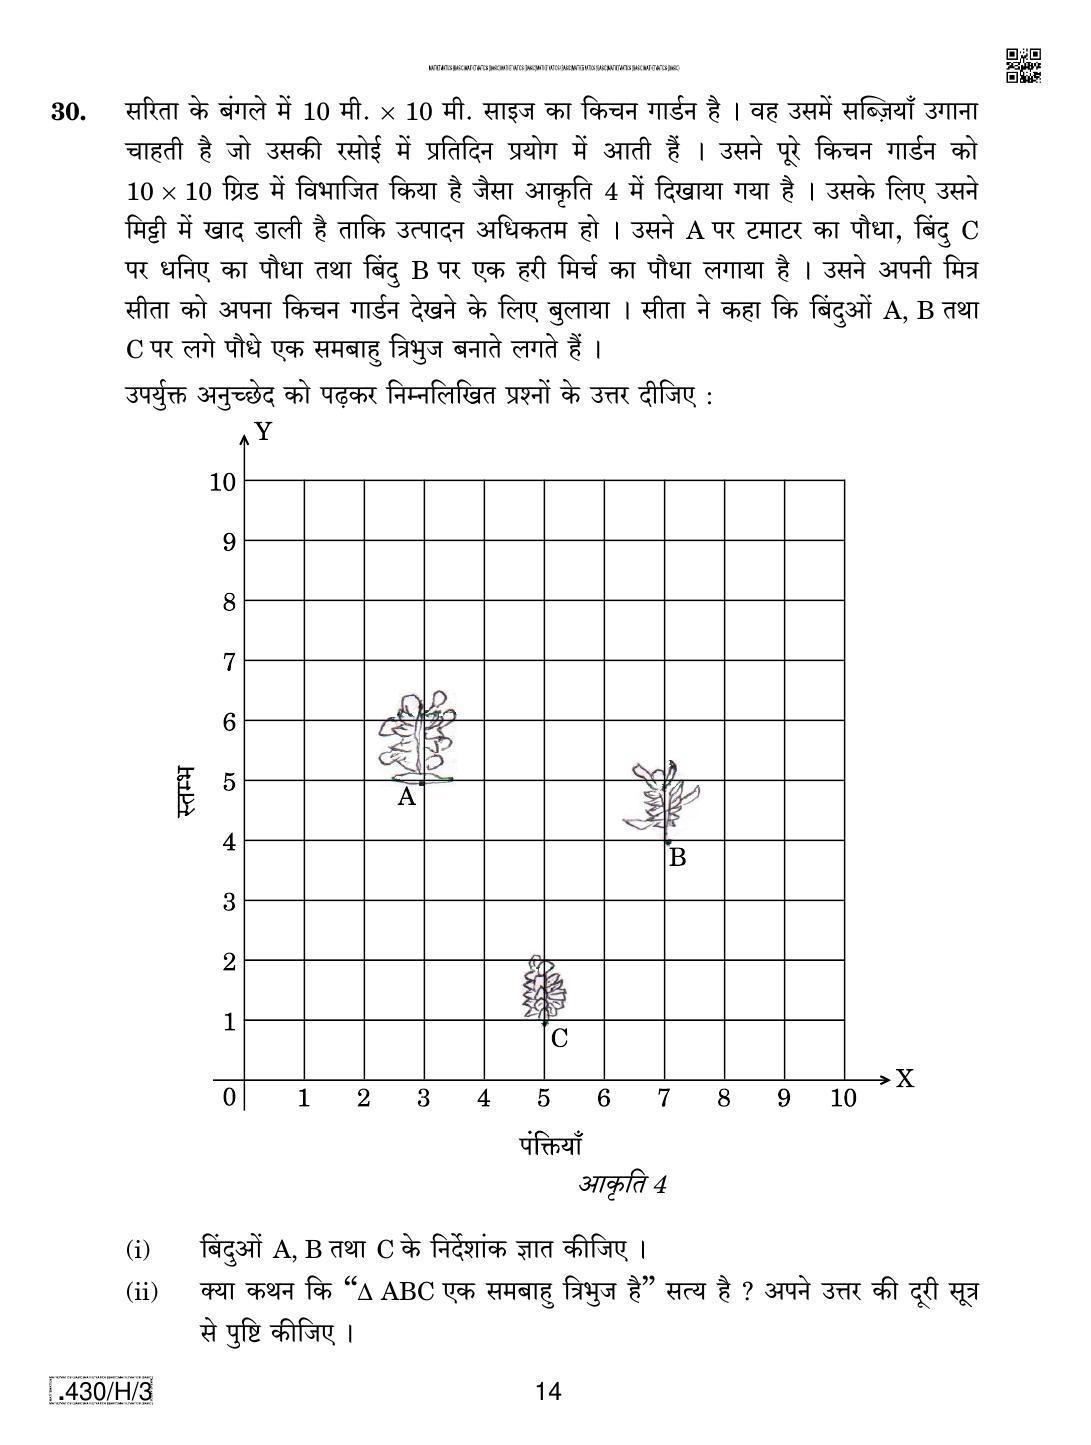 CBSE Class 10 430-C-3 - Maths (Basic) 2020 Compartment Question Paper - Page 14